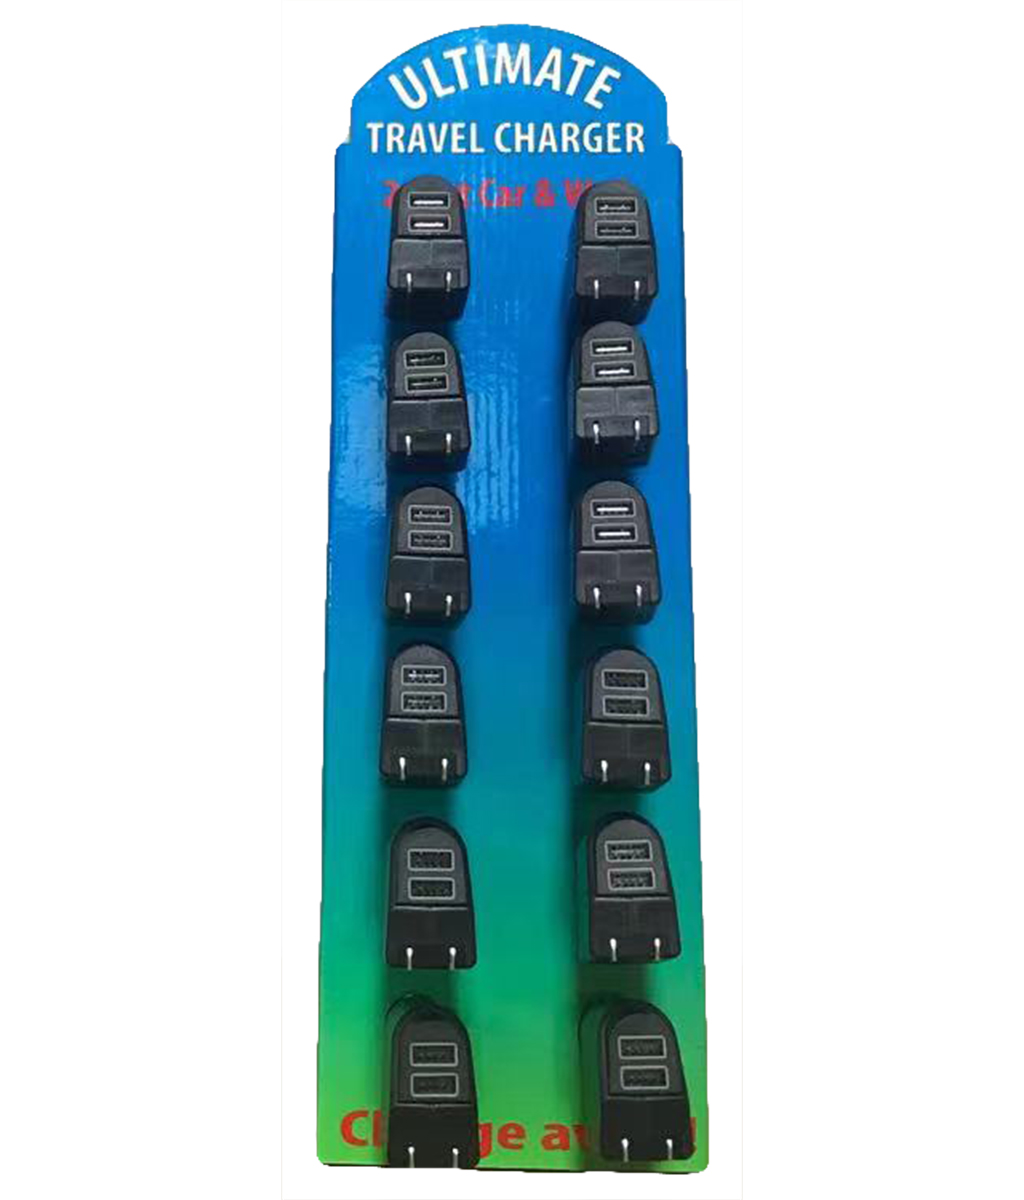 Ultimate Travel Charger display